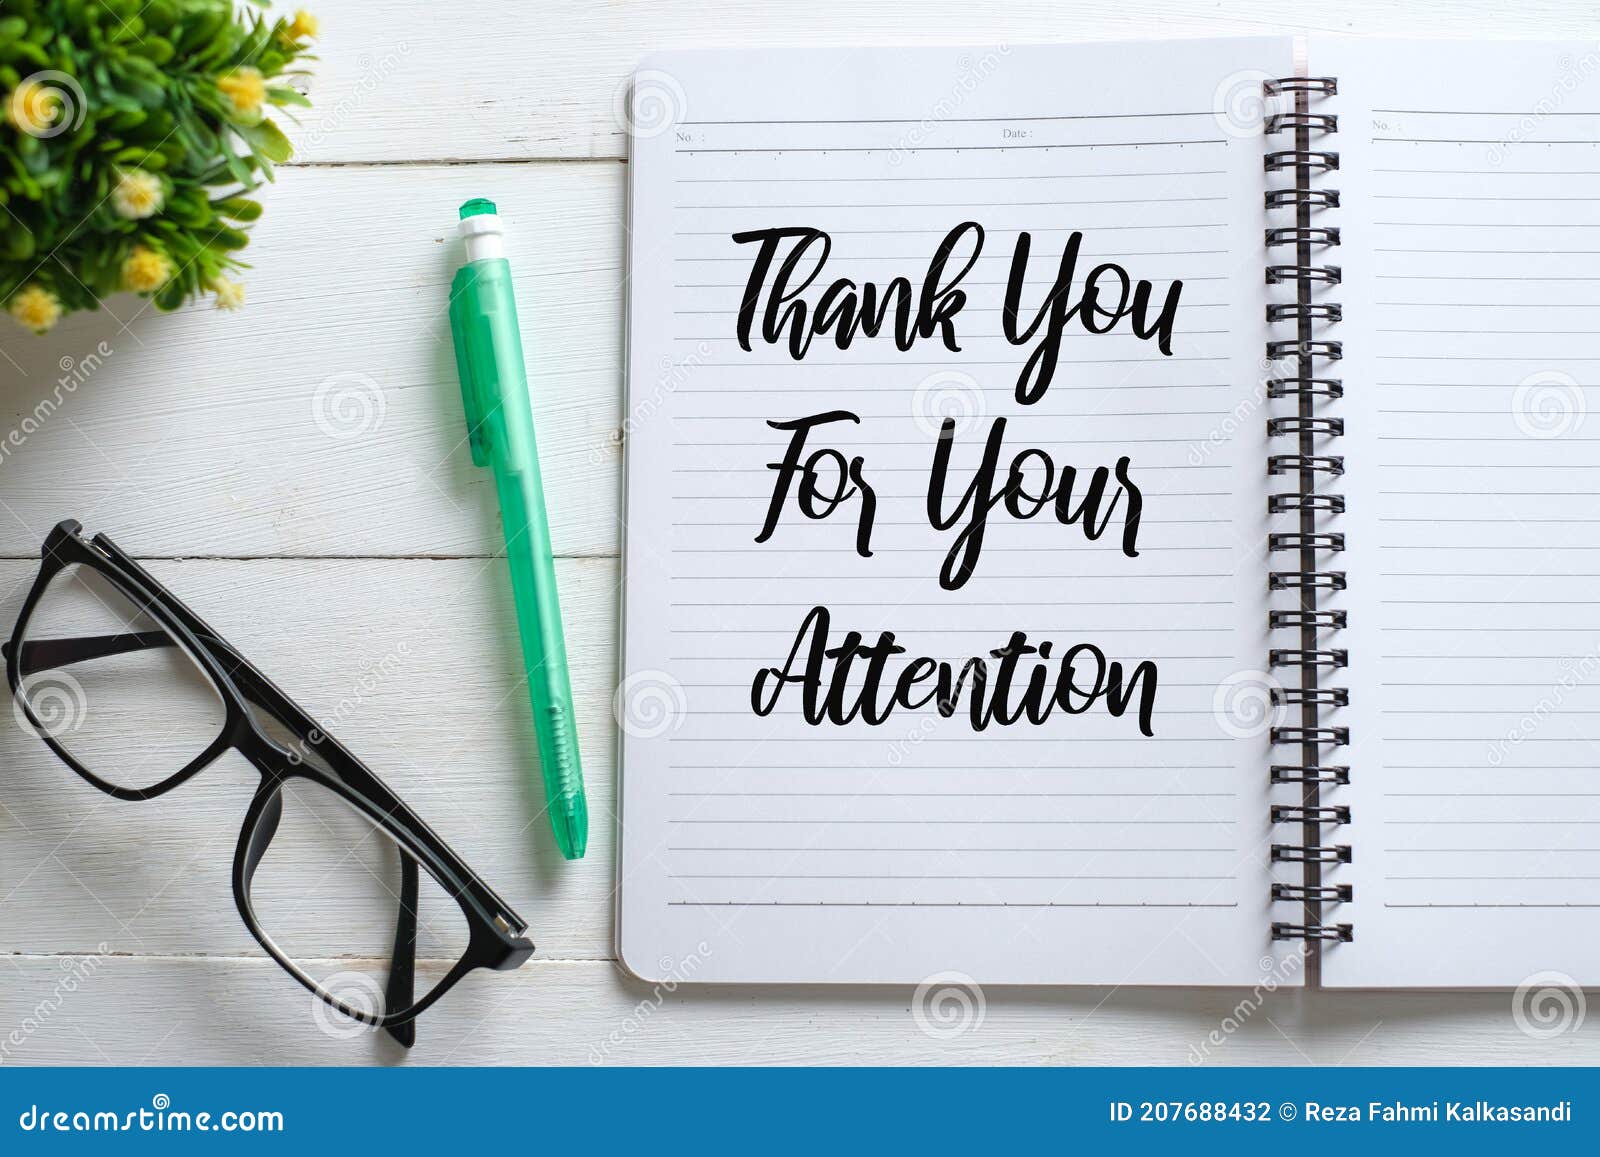 Thank You Your Attention Photos Free Royalty Free Stock Photos From Dreamstime